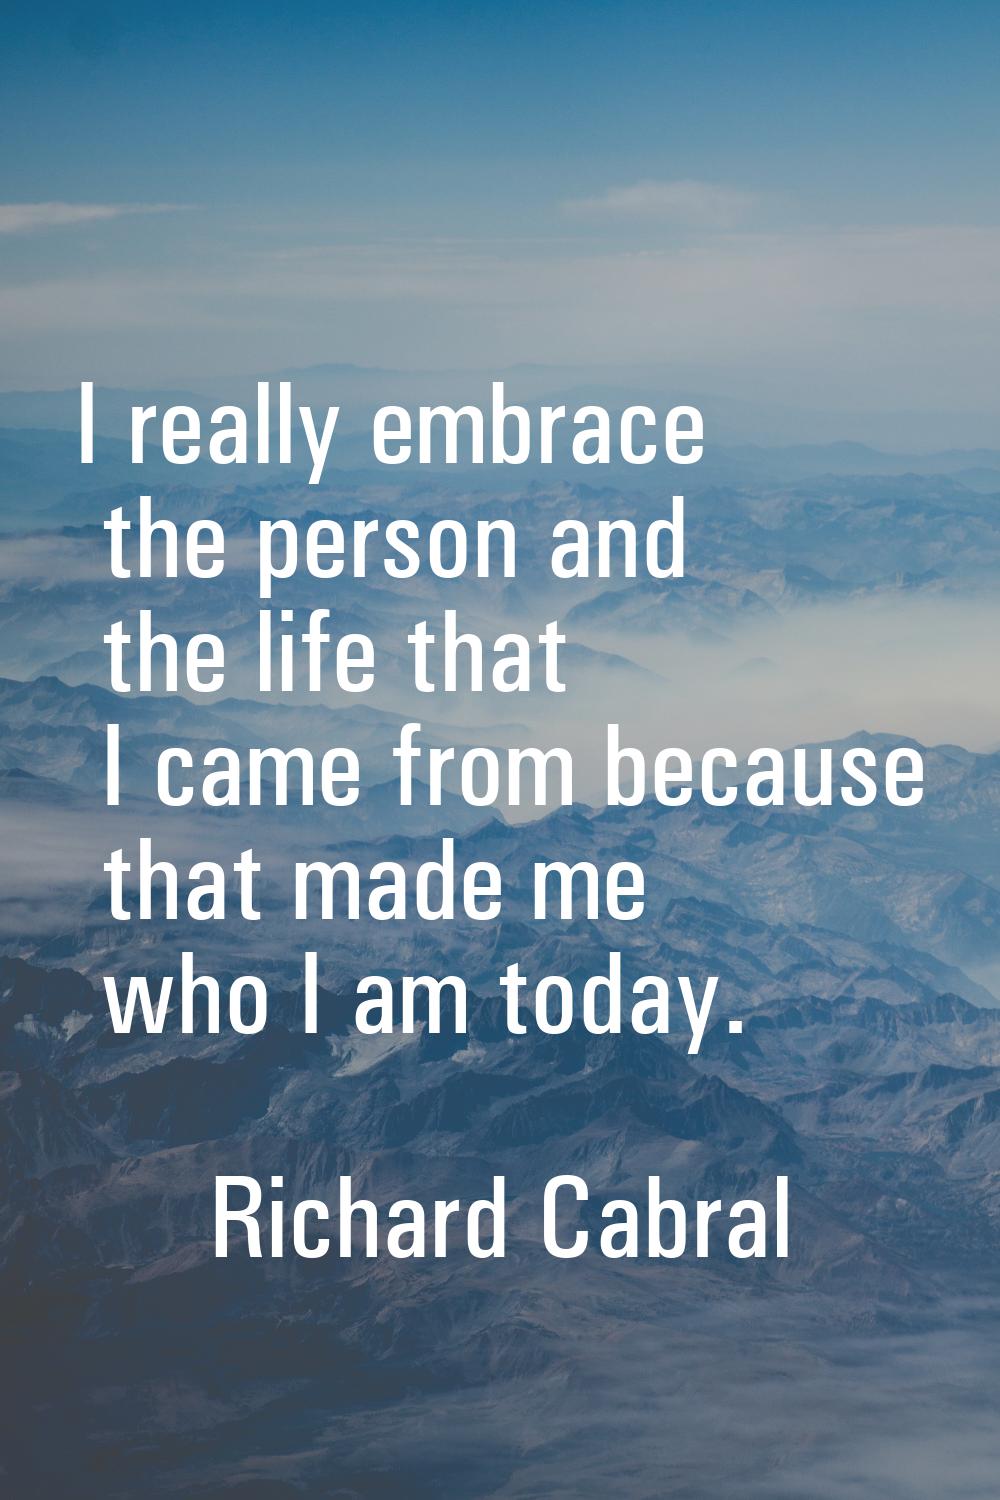 I really embrace the person and the life that I came from because that made me who I am today.